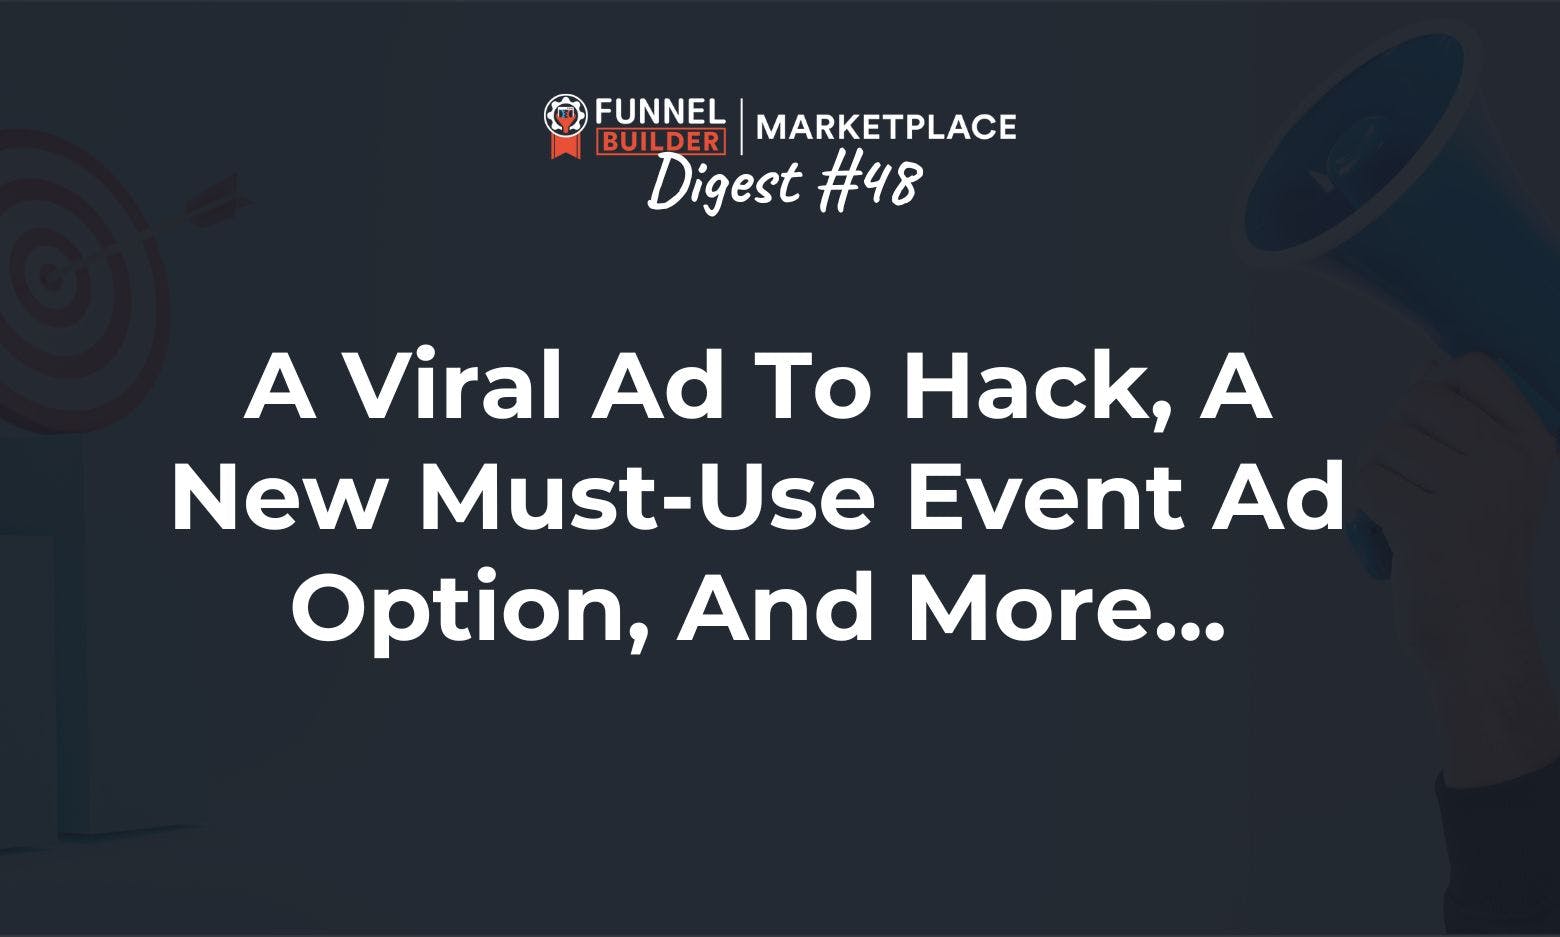 FBM Digest #48: A viral ad to hack, new must-use event ad option, and more...